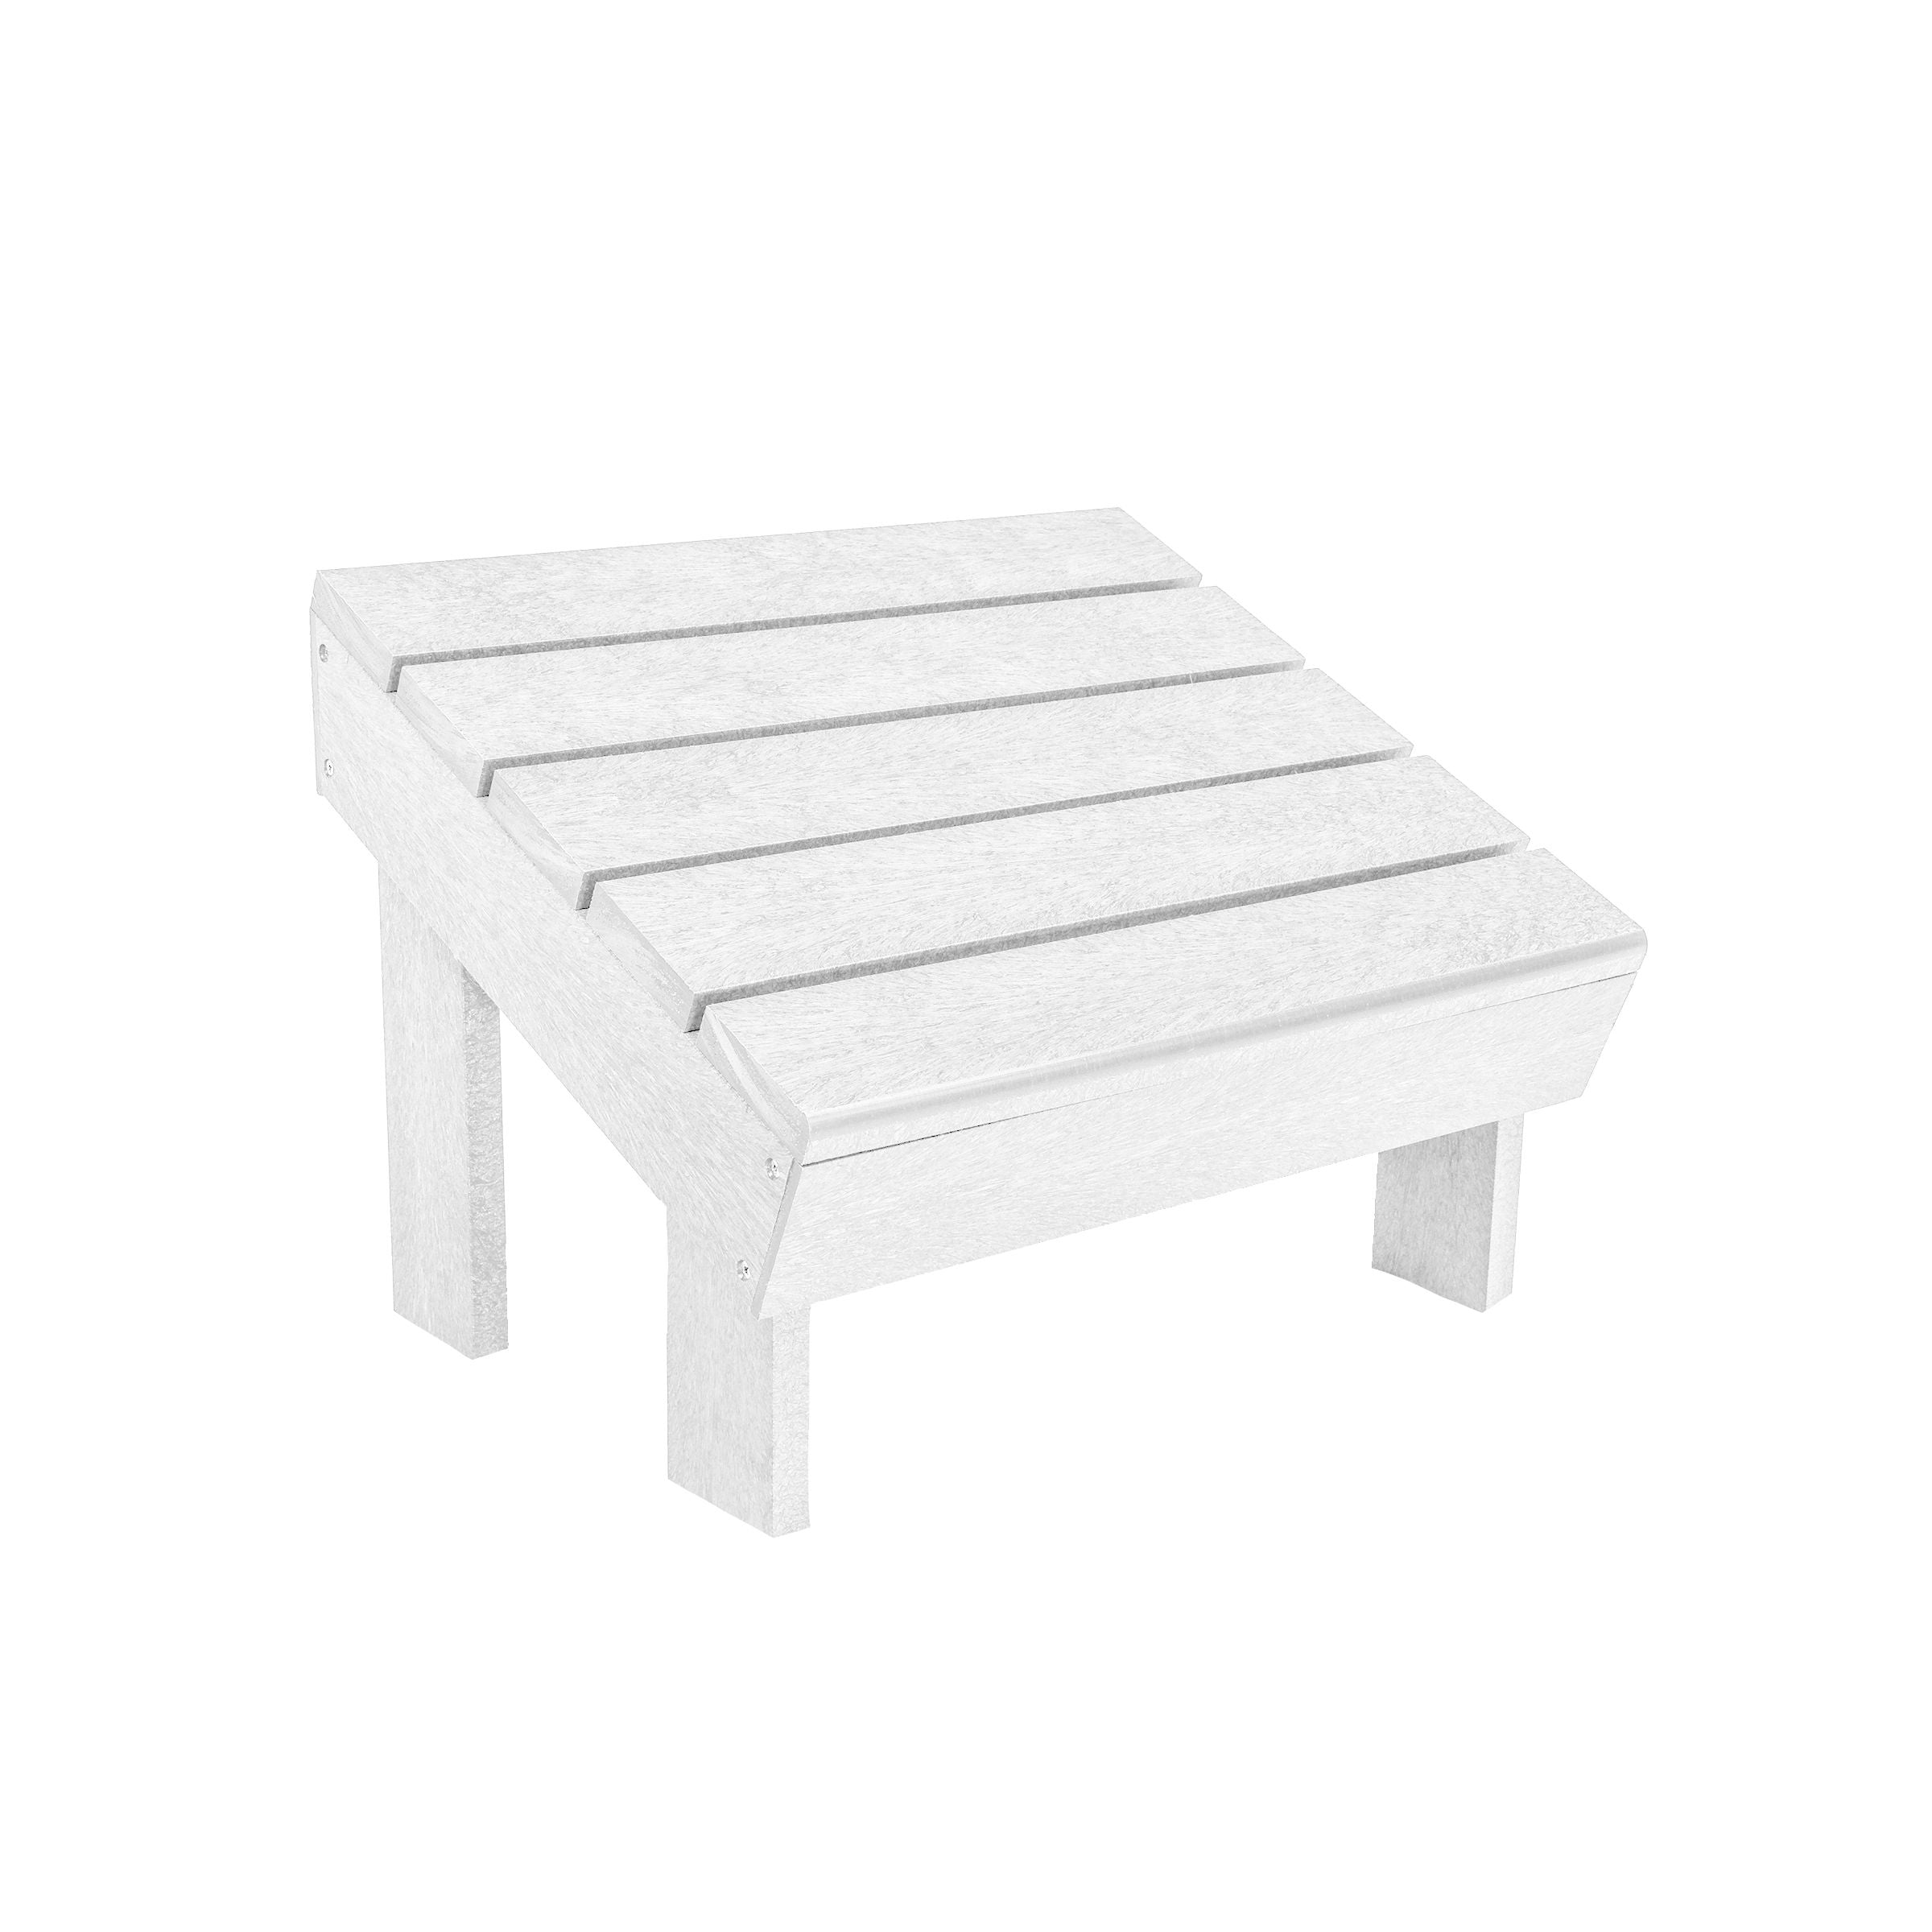 C.R. Plastic Products Modern Footstool White 12041306